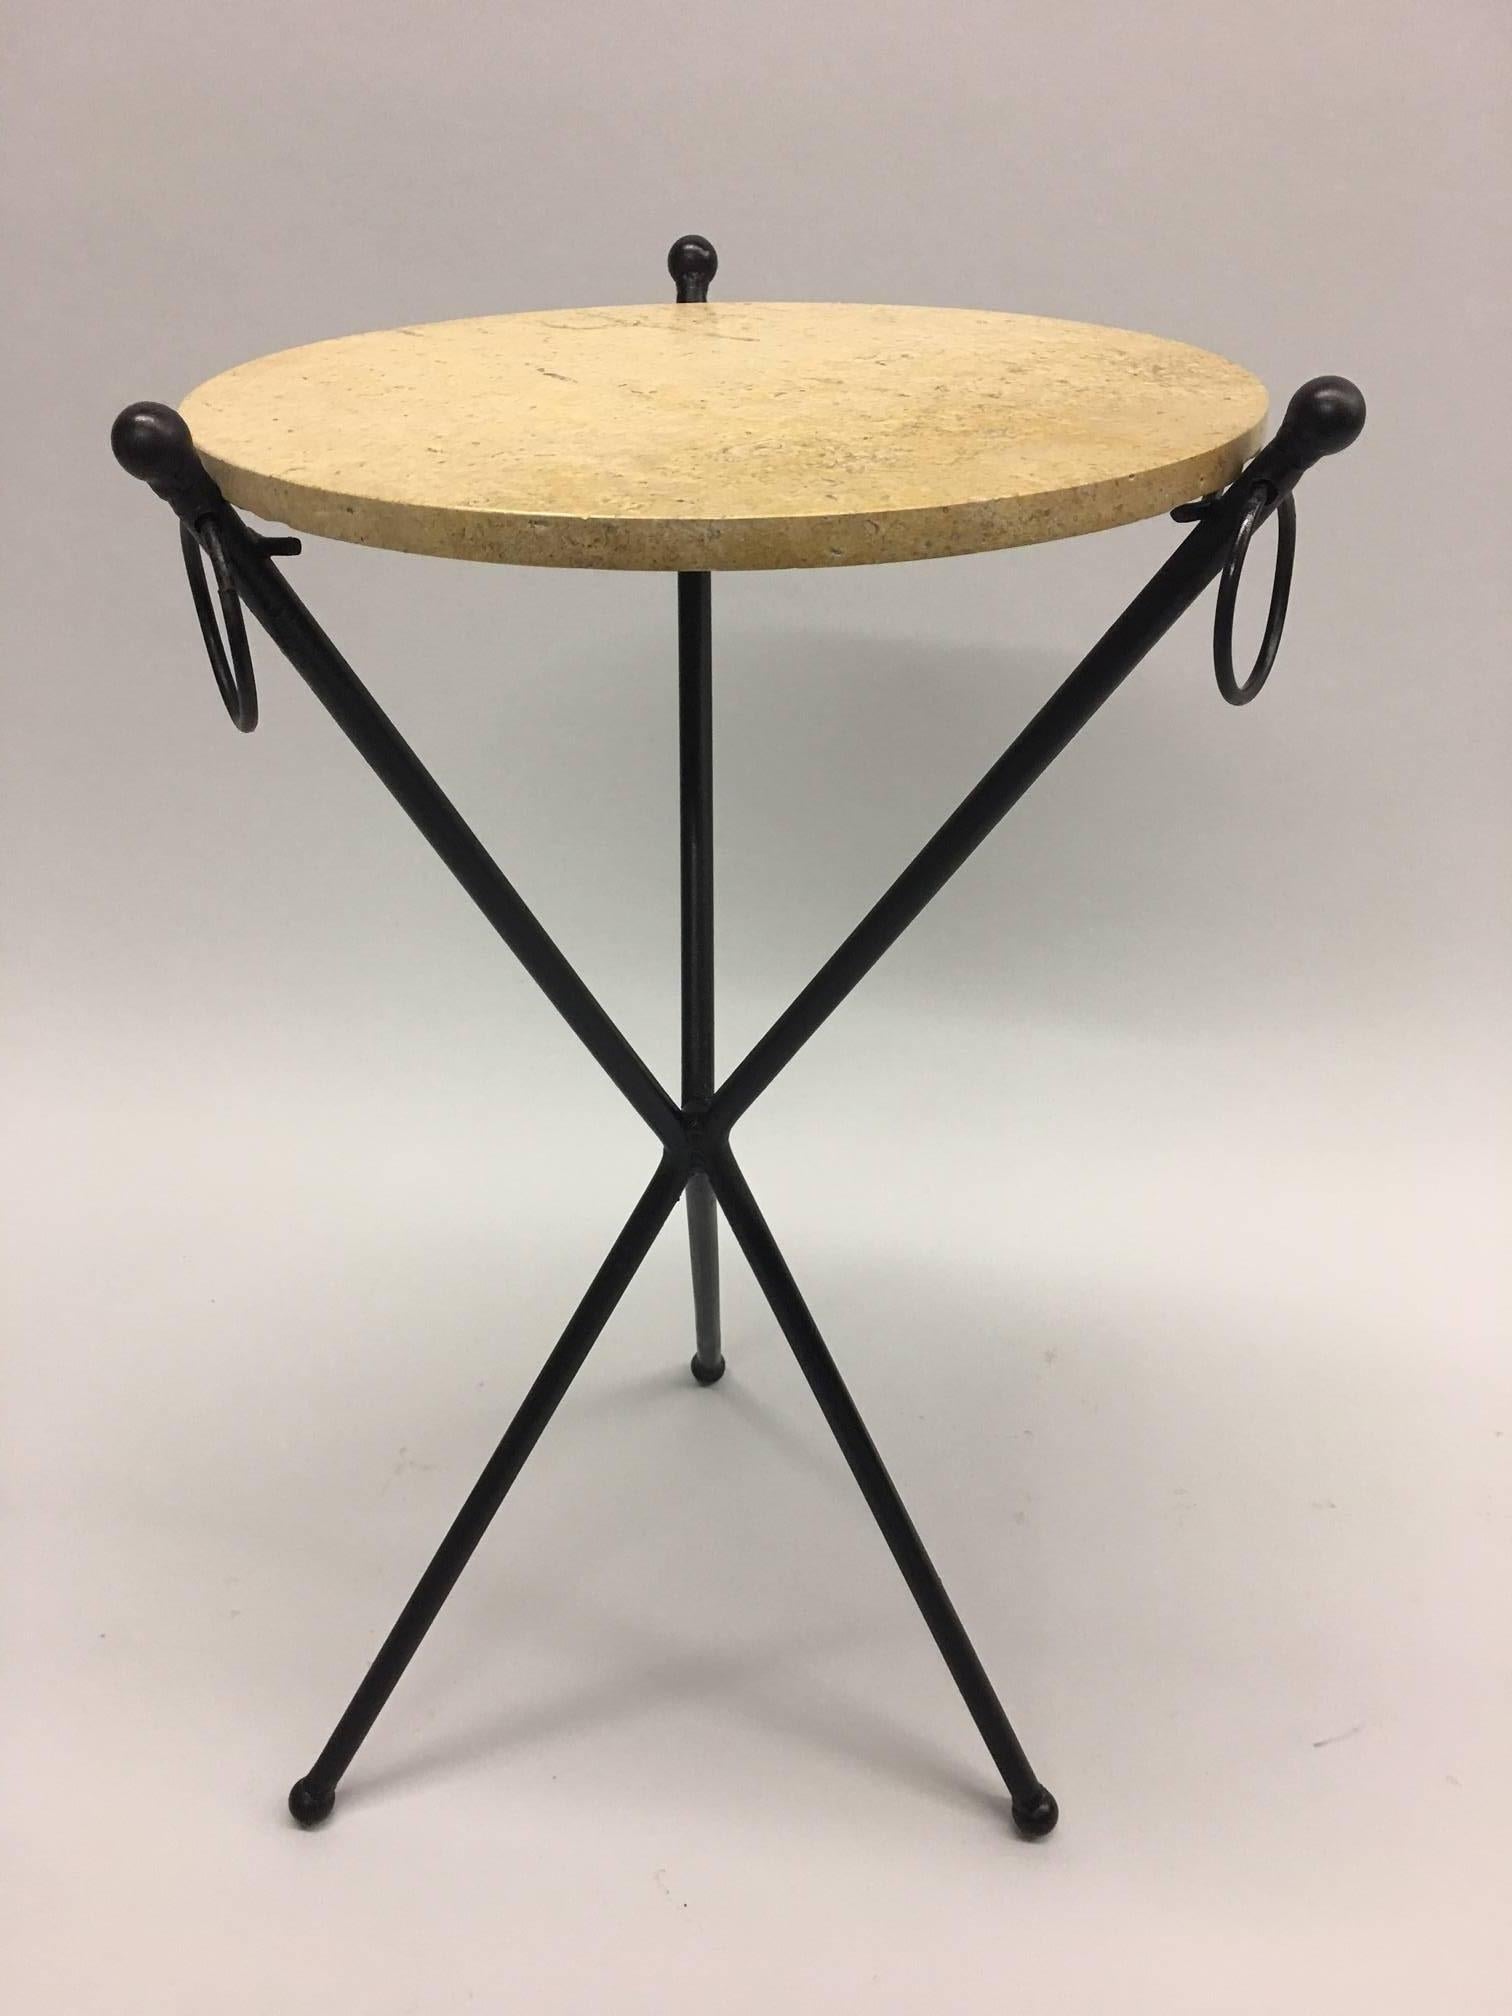 2 Elegant and Timeless French Mid-Century Modern Neoclassical Style End or Side Tables/ Nightstands /Gueridons in an exquisite, balanced tripod form. The tables are composed of hand-wrought iron with black patina in the style of Jean-Michel Frank.